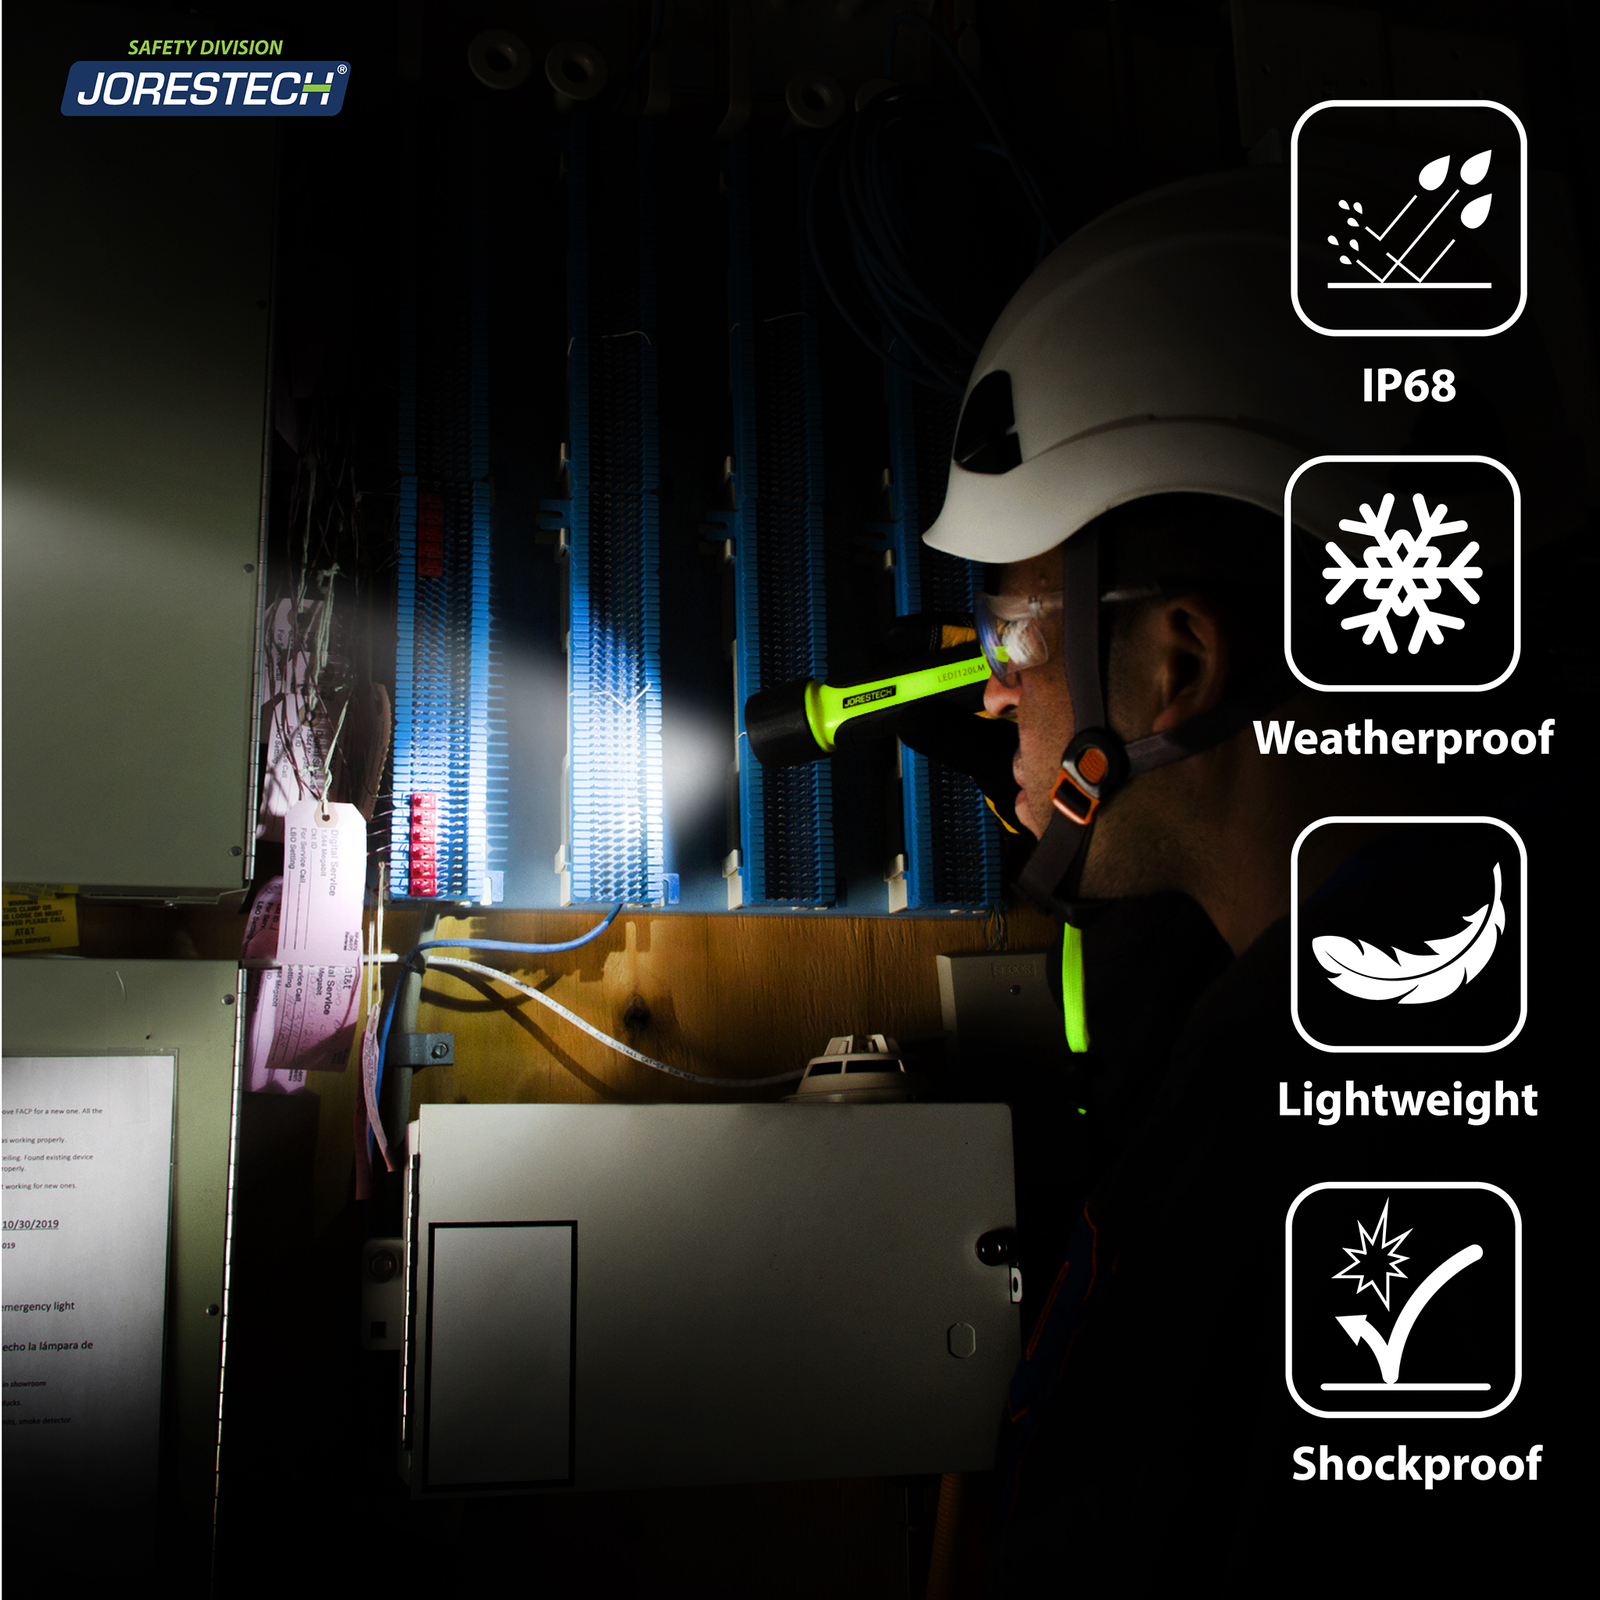 A worker doing repairs in a breaker switch box while the only light source in the one coming from the flashlight. Icons describe: IP68, Weatherproof, lightweight and shockproof